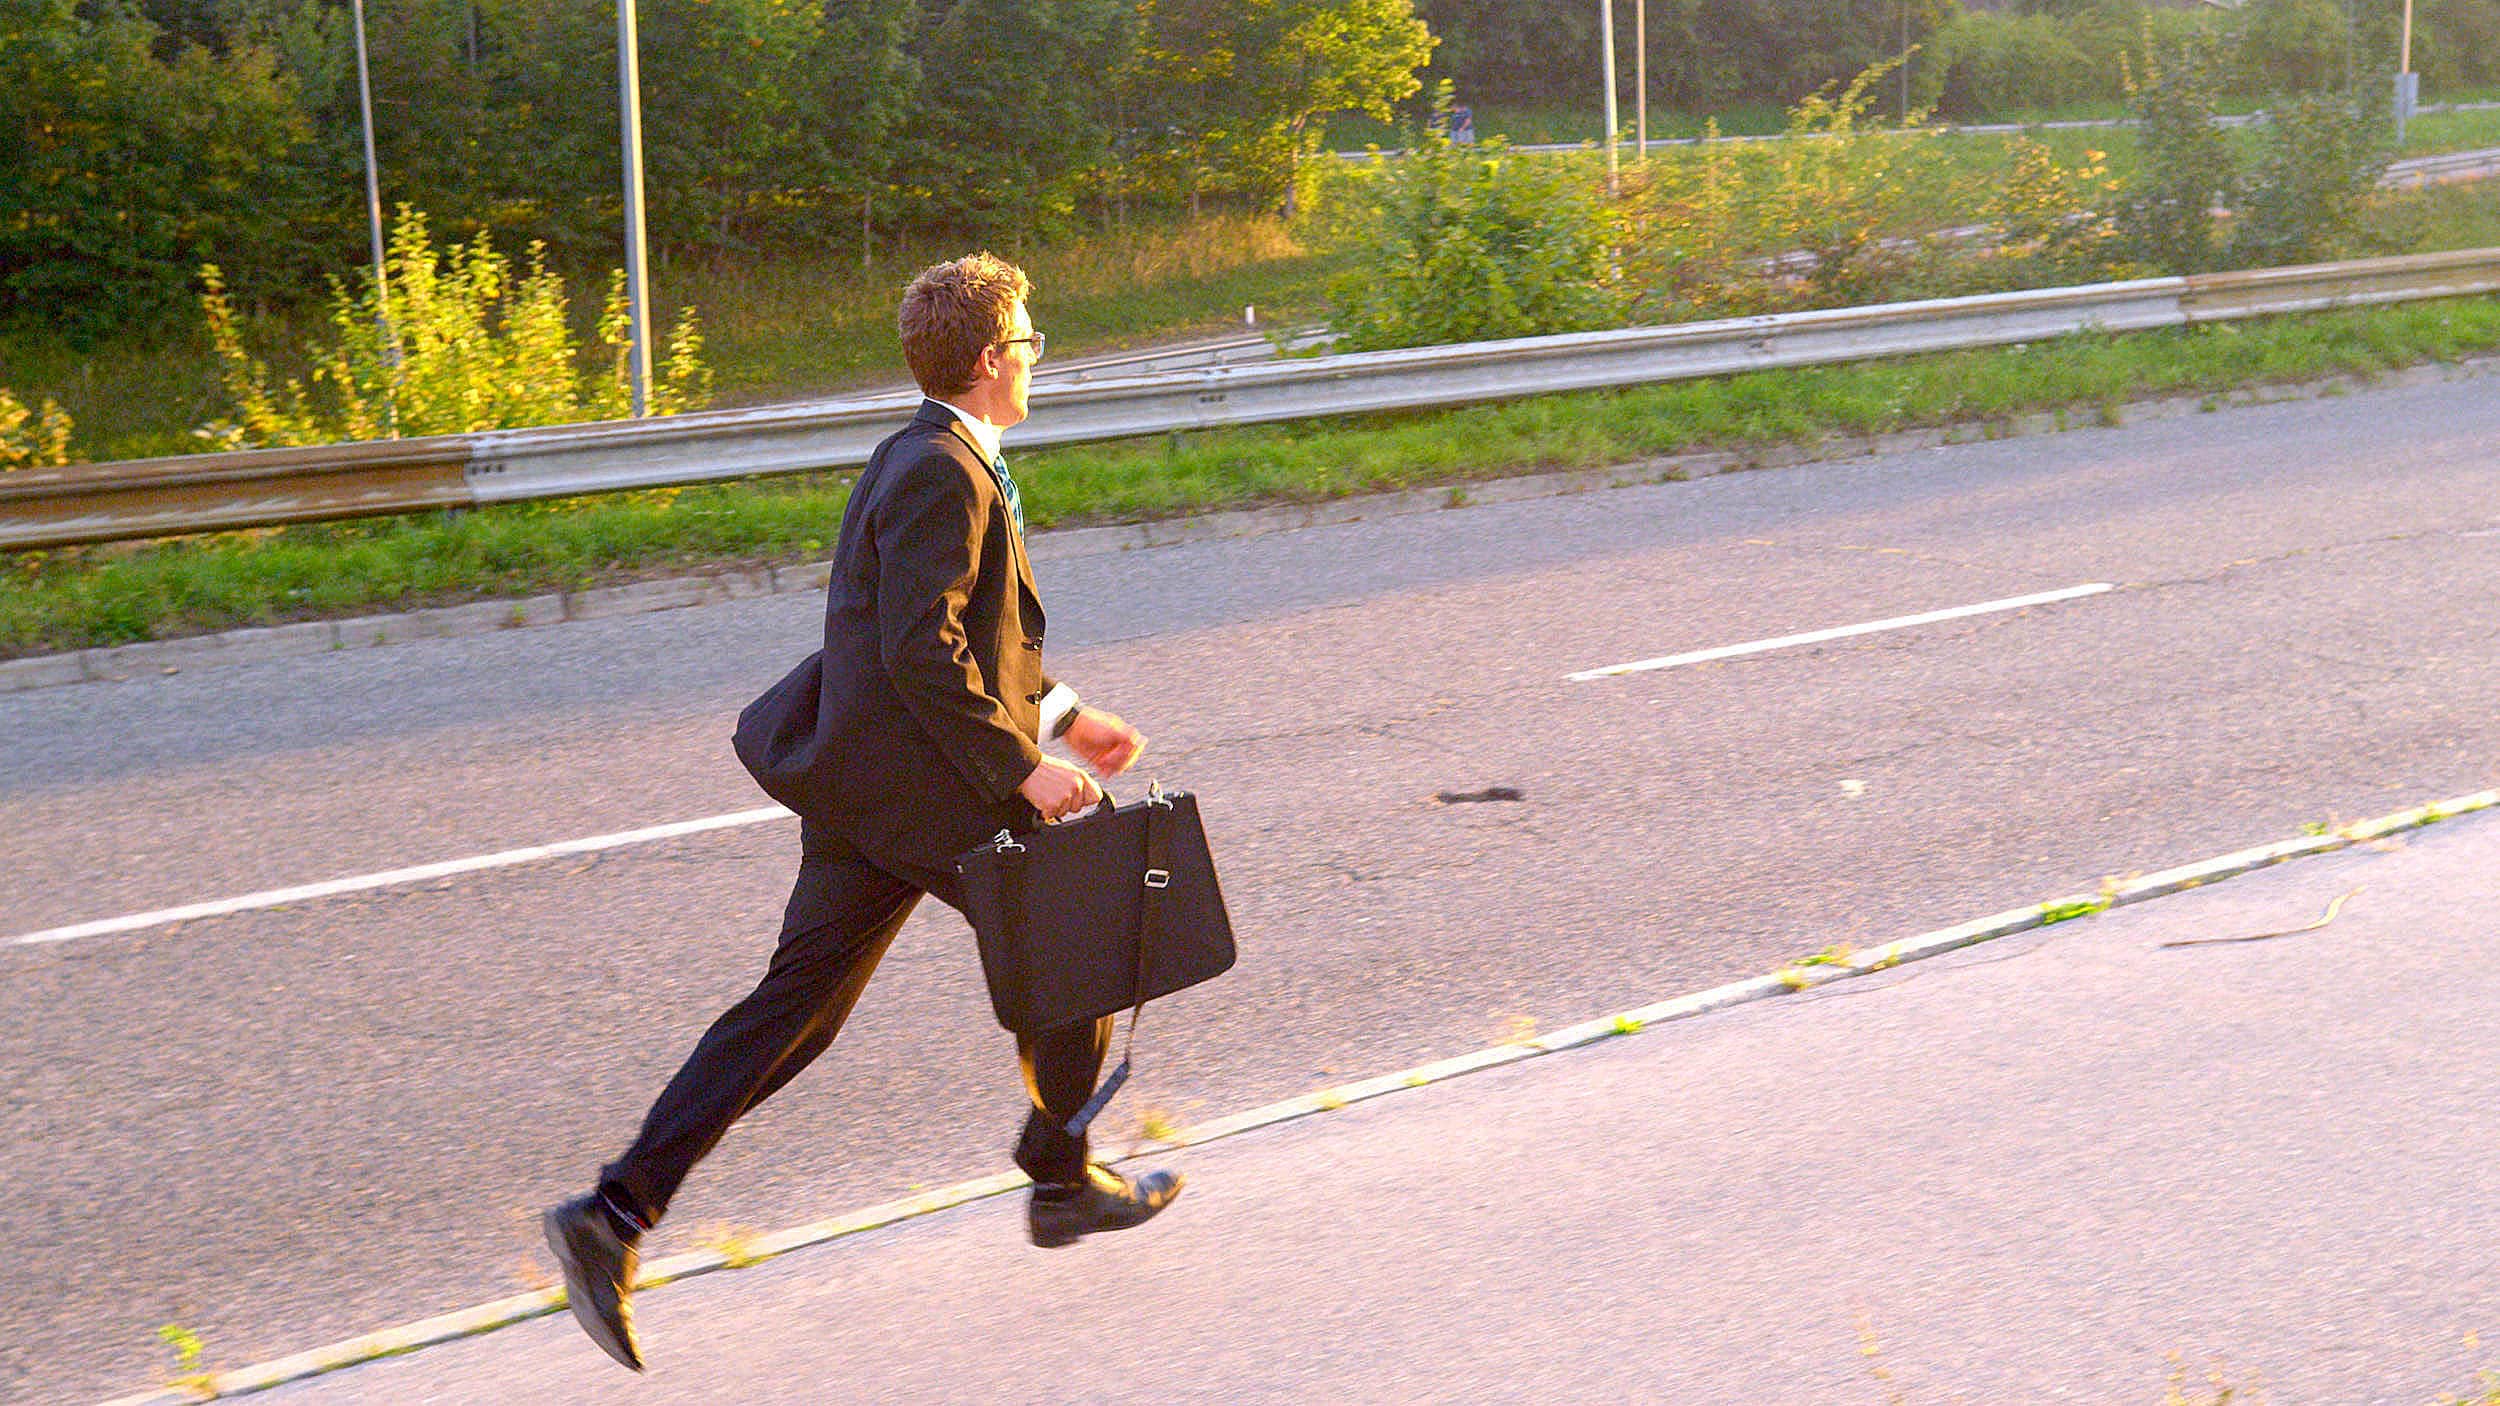 Office dude with briefcase chasing cars